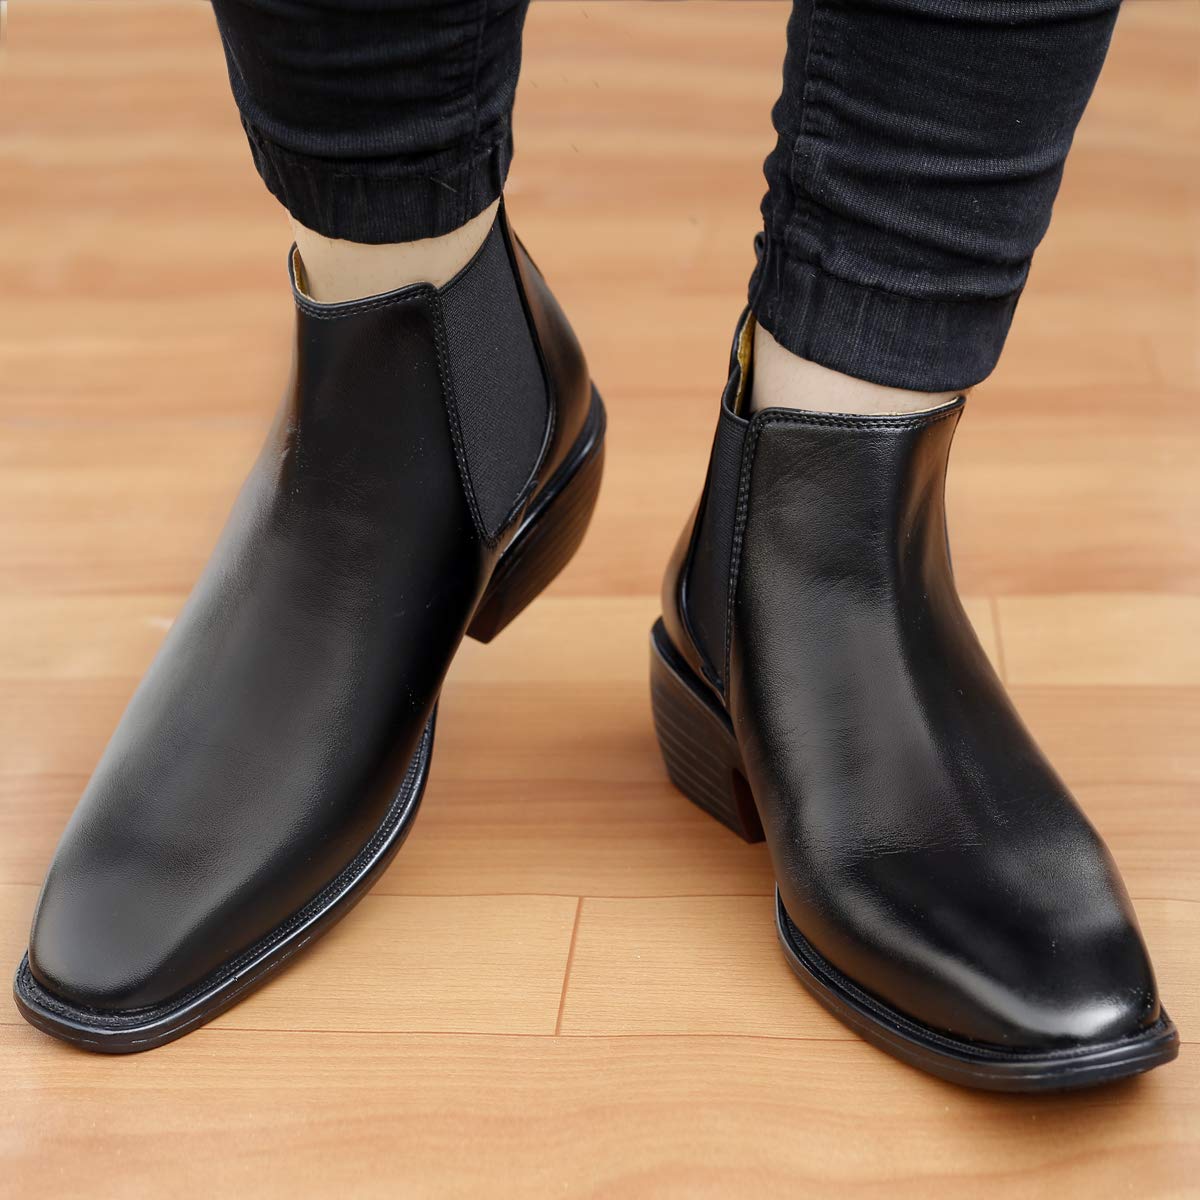 Classy Hight Ankle Height Increasing Black Chelsea Boots For Men-JonasParamount